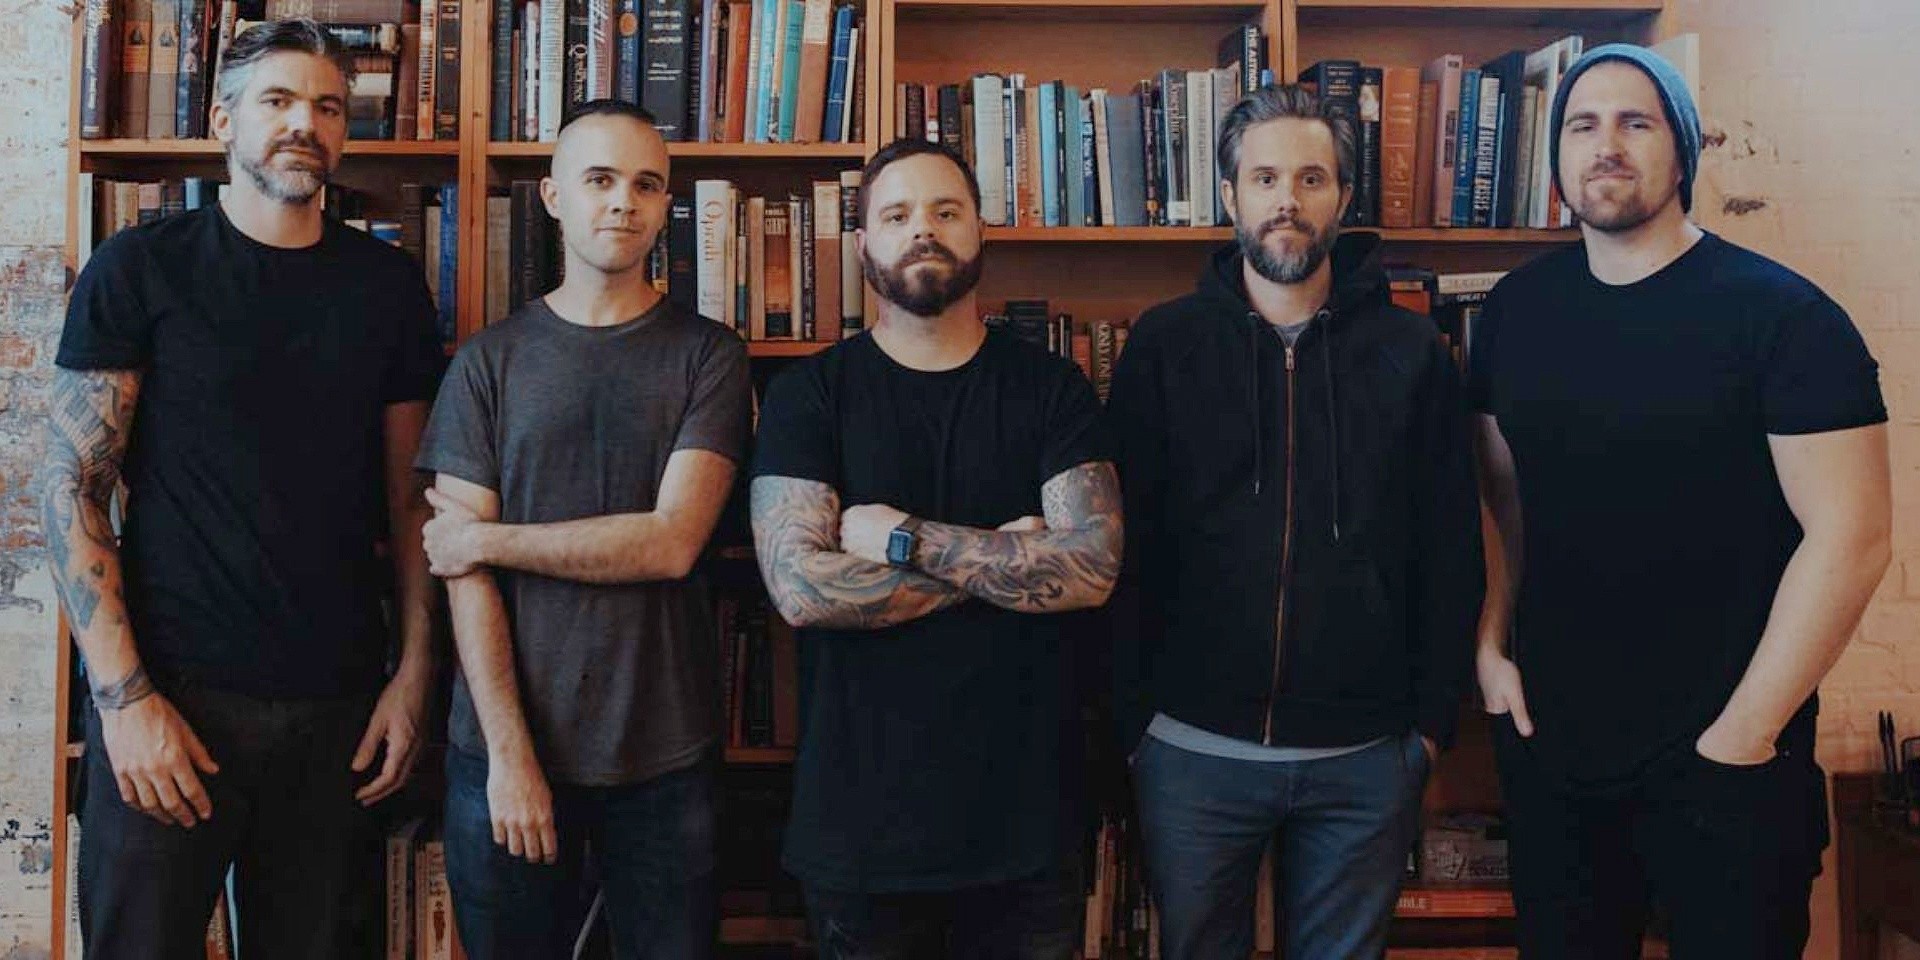 Between The Buried And Me team up with Mike Portnoy, Navene Koperweis, Ken Schalk for new single 'Fix the Error' from upcoming album Colors II – listen